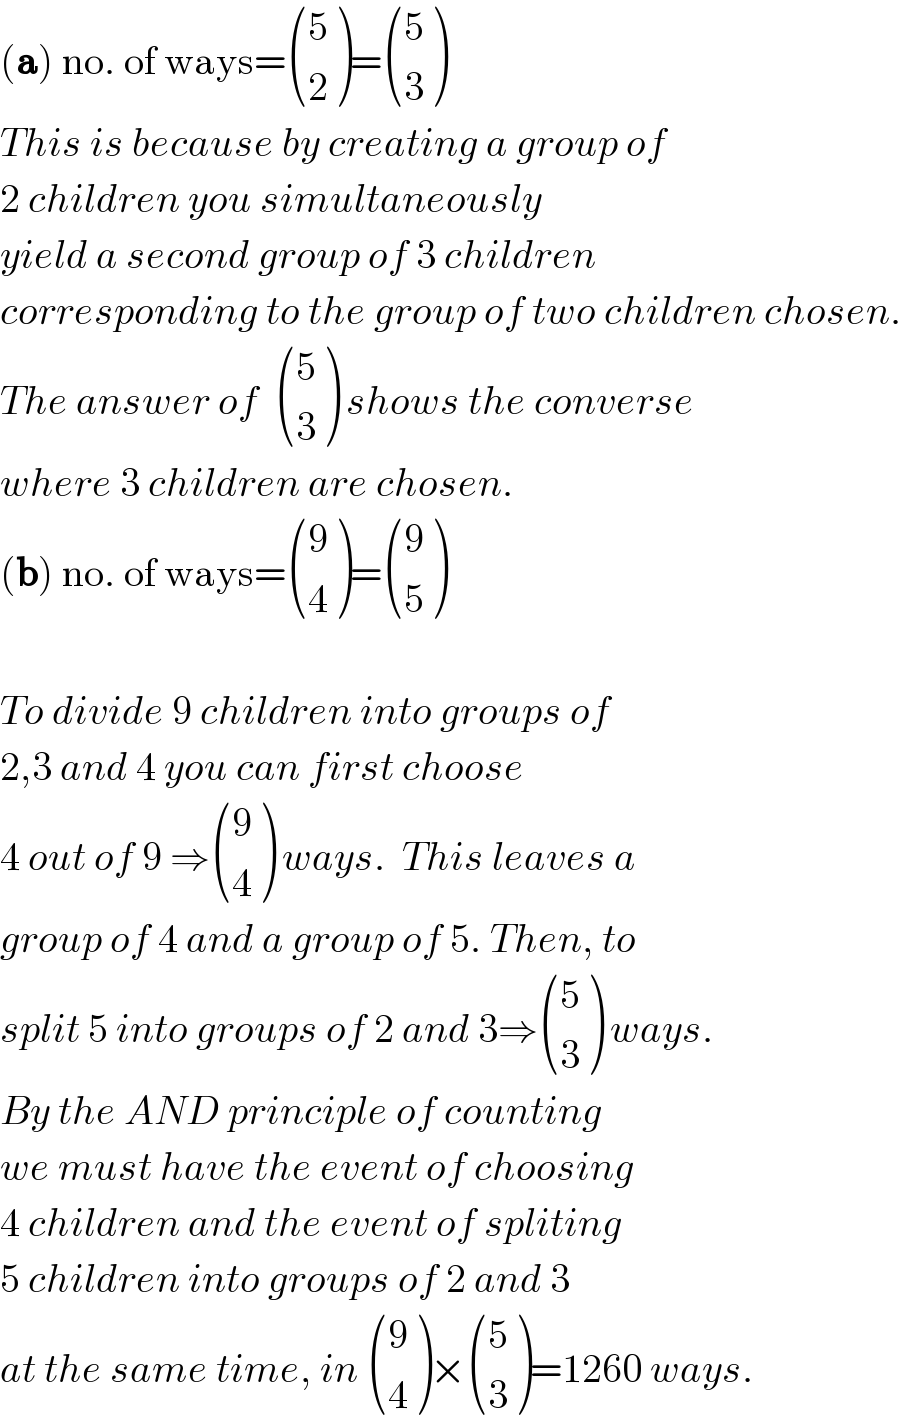 (a) no. of ways= ((5),(2) )= ((5),(3) )  This is because by creating a group of  2 children you simultaneously  yield a second group of 3 children  corresponding to the group of two children chosen.  The answer of   ((5),(3) ) shows the converse  where 3 children are chosen.  (b) no. of ways= ((9),(4) )= ((9),(5) )    To divide 9 children into groups of  2,3 and 4 you can first choose   4 out of 9 ⇒ ((9),(4) ) ways.  This leaves a   group of 4 and a group of 5. Then, to  split 5 into groups of 2 and 3⇒ ((5),(3) ) ways.  By the AND principle of counting  we must have the event of choosing  4 children and the event of spliting  5 children into groups of 2 and 3  at the same time, in  ((9),(4) )× ((5),(3) )=1260 ways.  